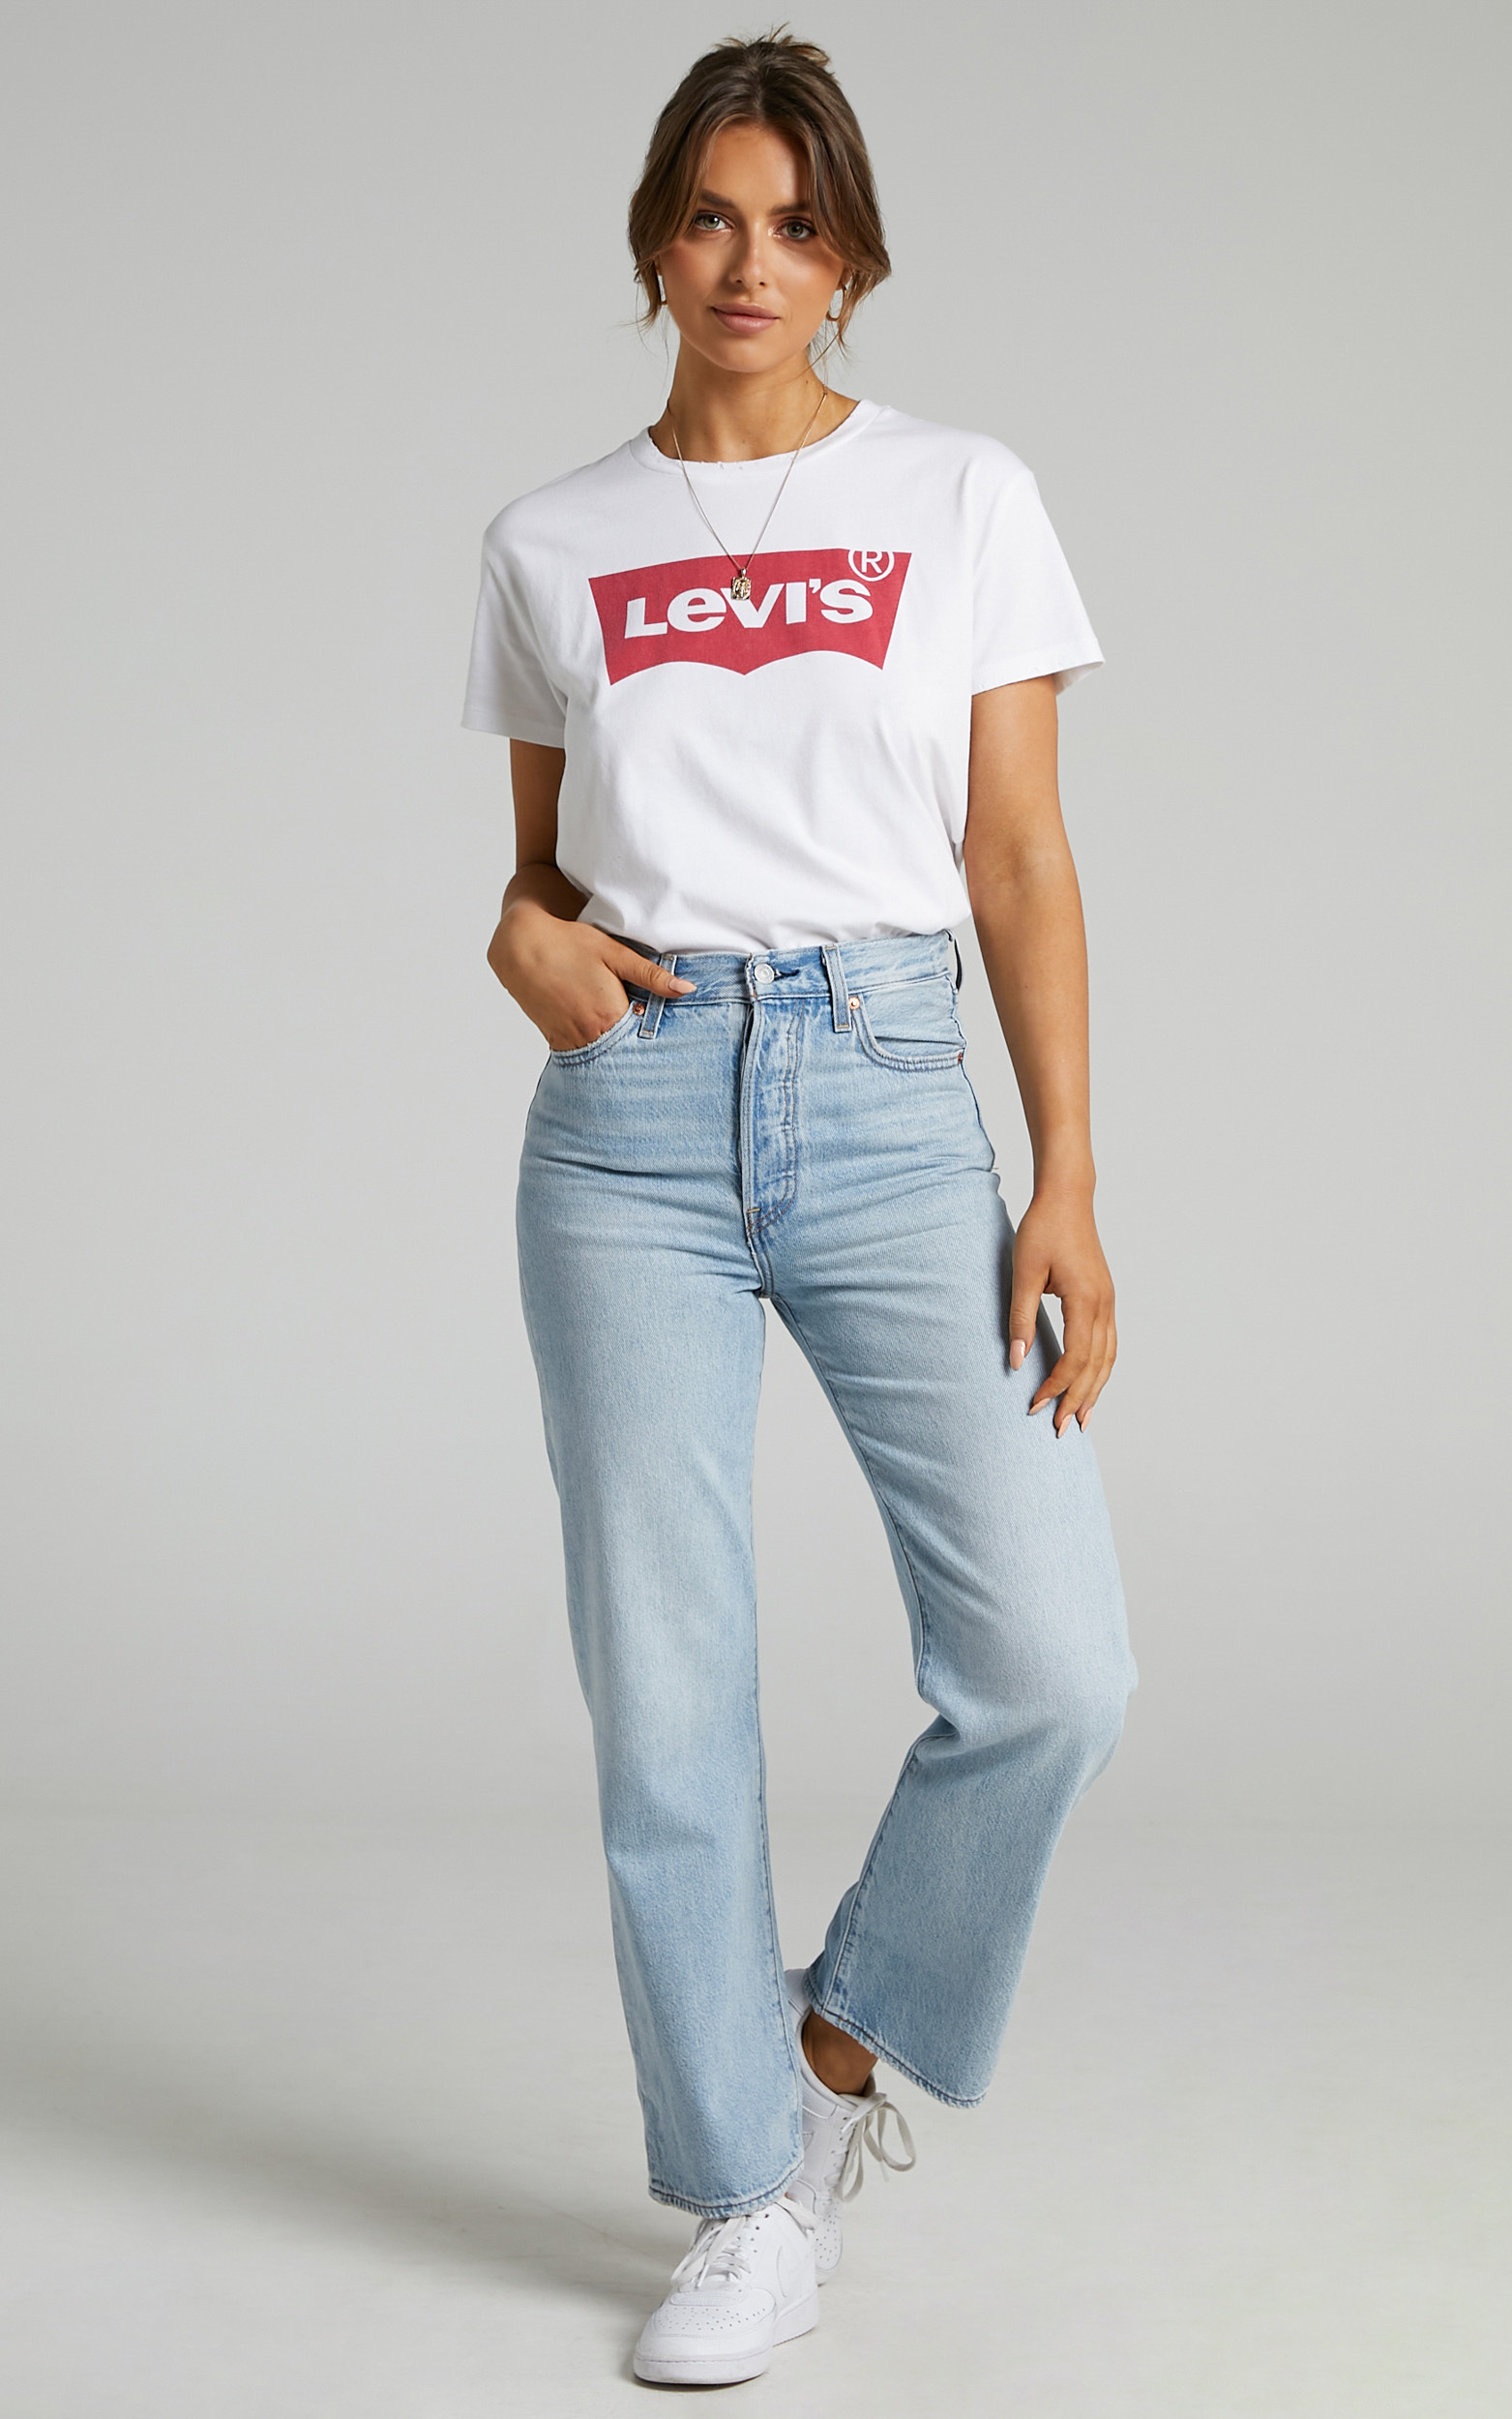 Levis - Ribcage Straight Jean in Middle Road | Showpo